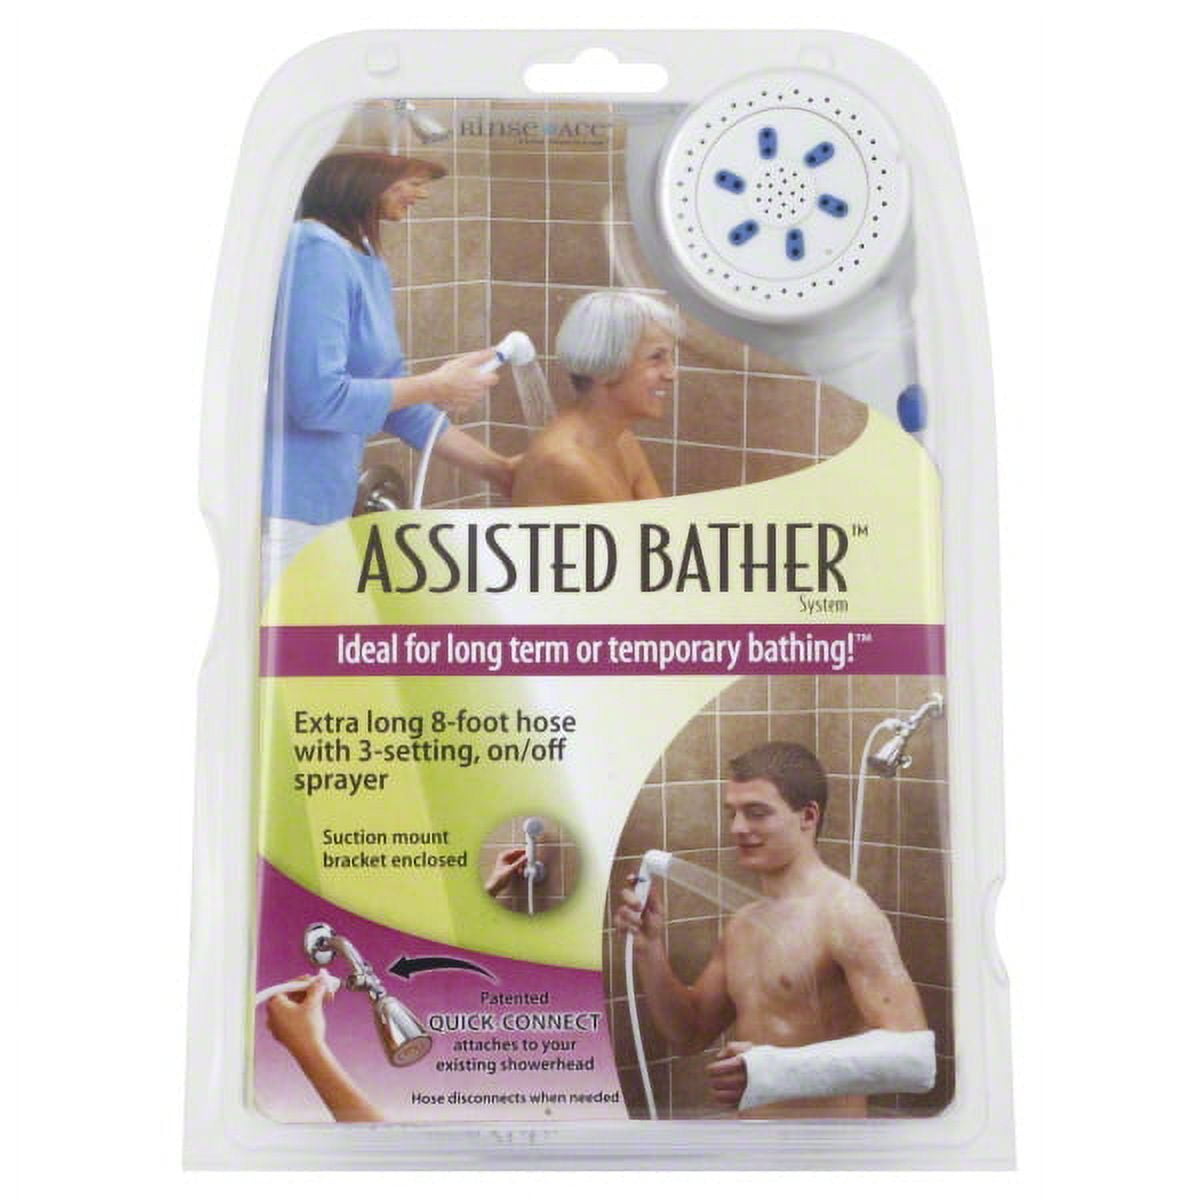 Rinse Ace 4694386 2.5 GPM Assisted Bather ABS 3 Settings Handheld Showerhead, White - Pack of 4